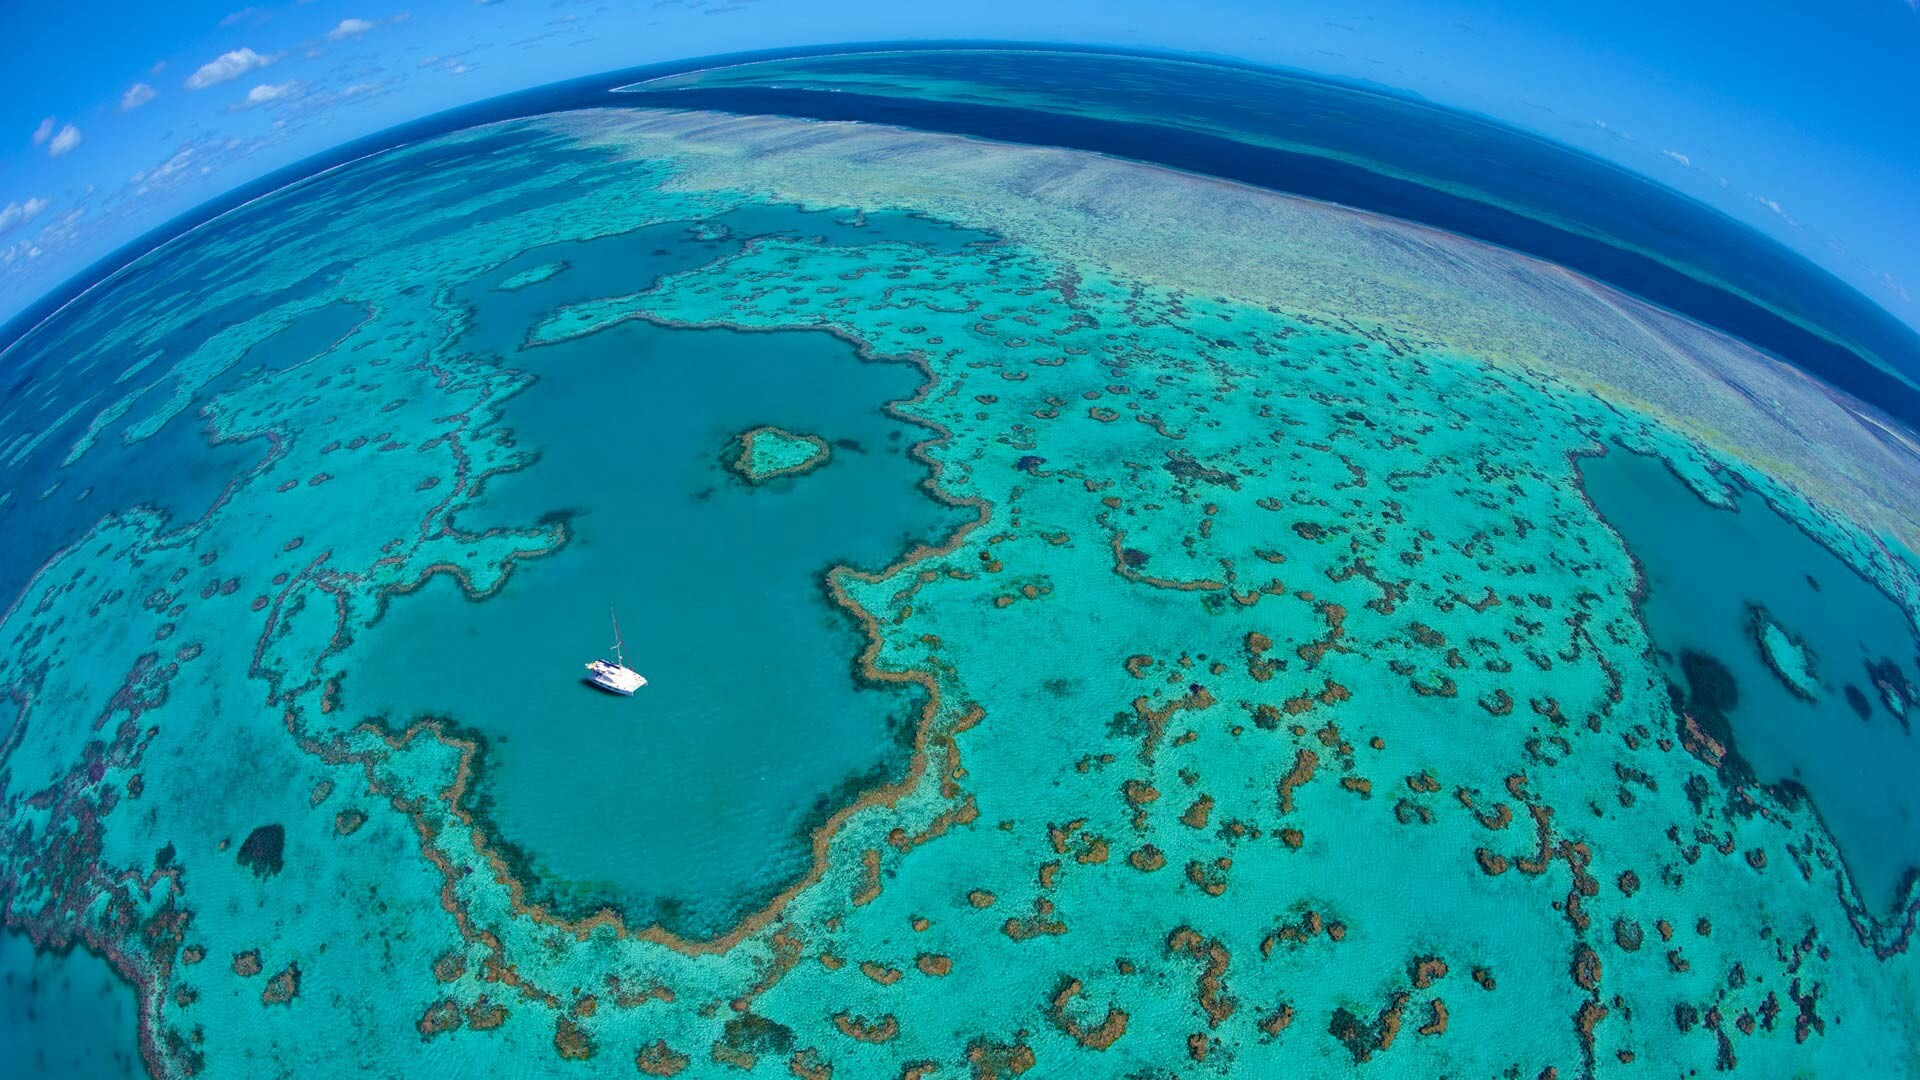 Great Barrier Reef: One of the 7 natural wonders of the world, GBR, Located off the coast of Australia's Queensland. 1920x1080 Full HD Wallpaper.